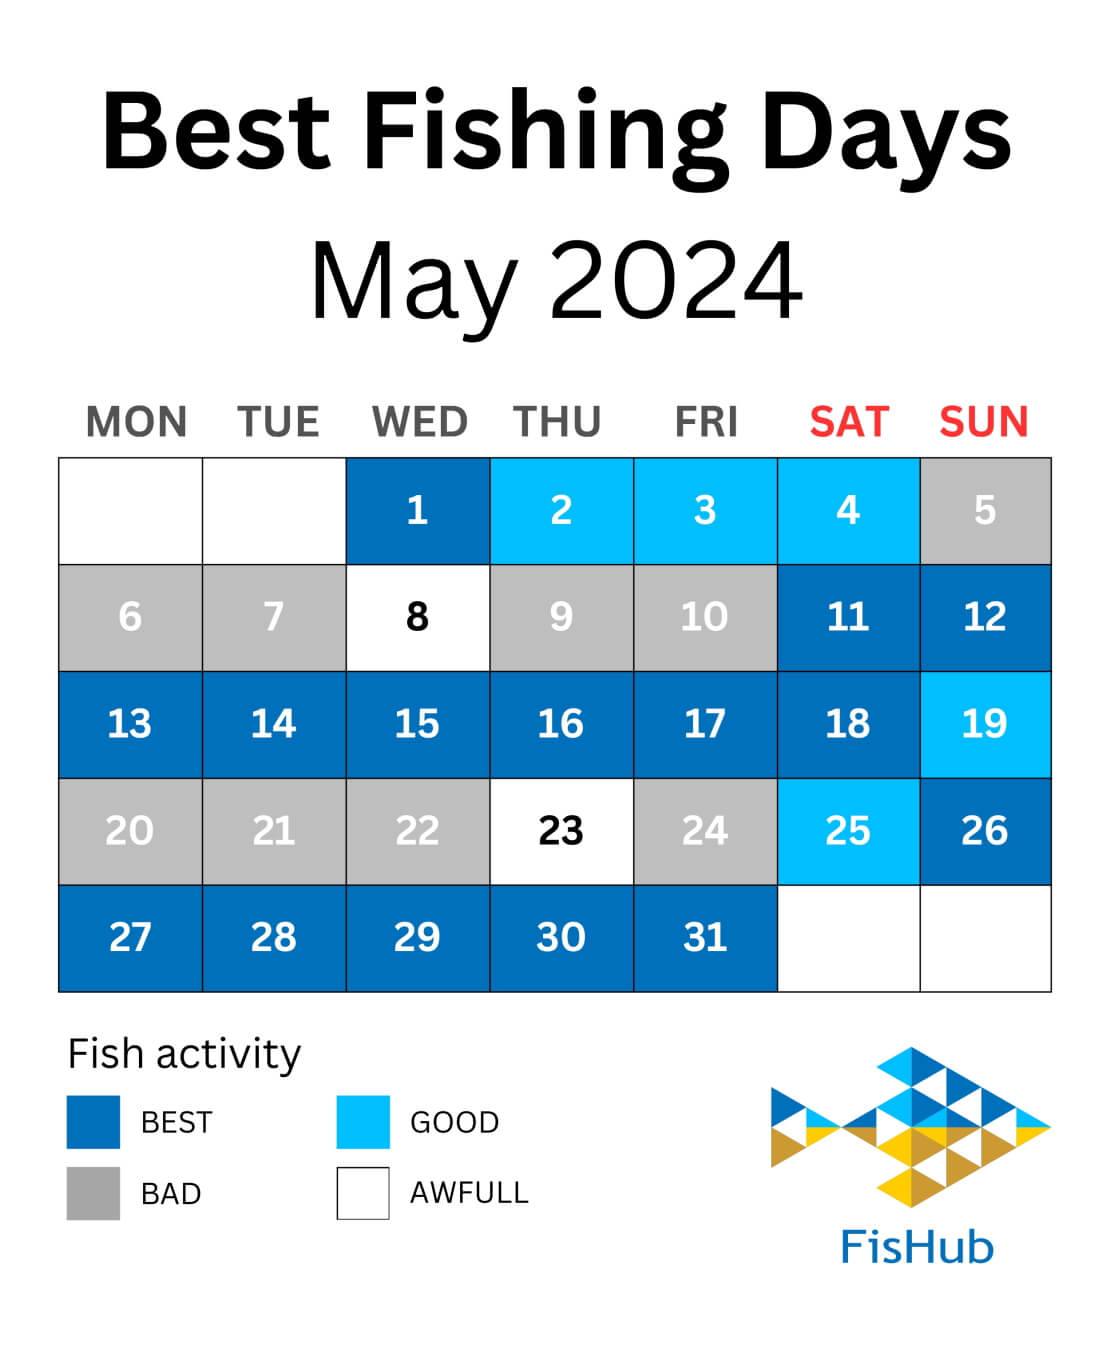 Best Fishing Days May 2024